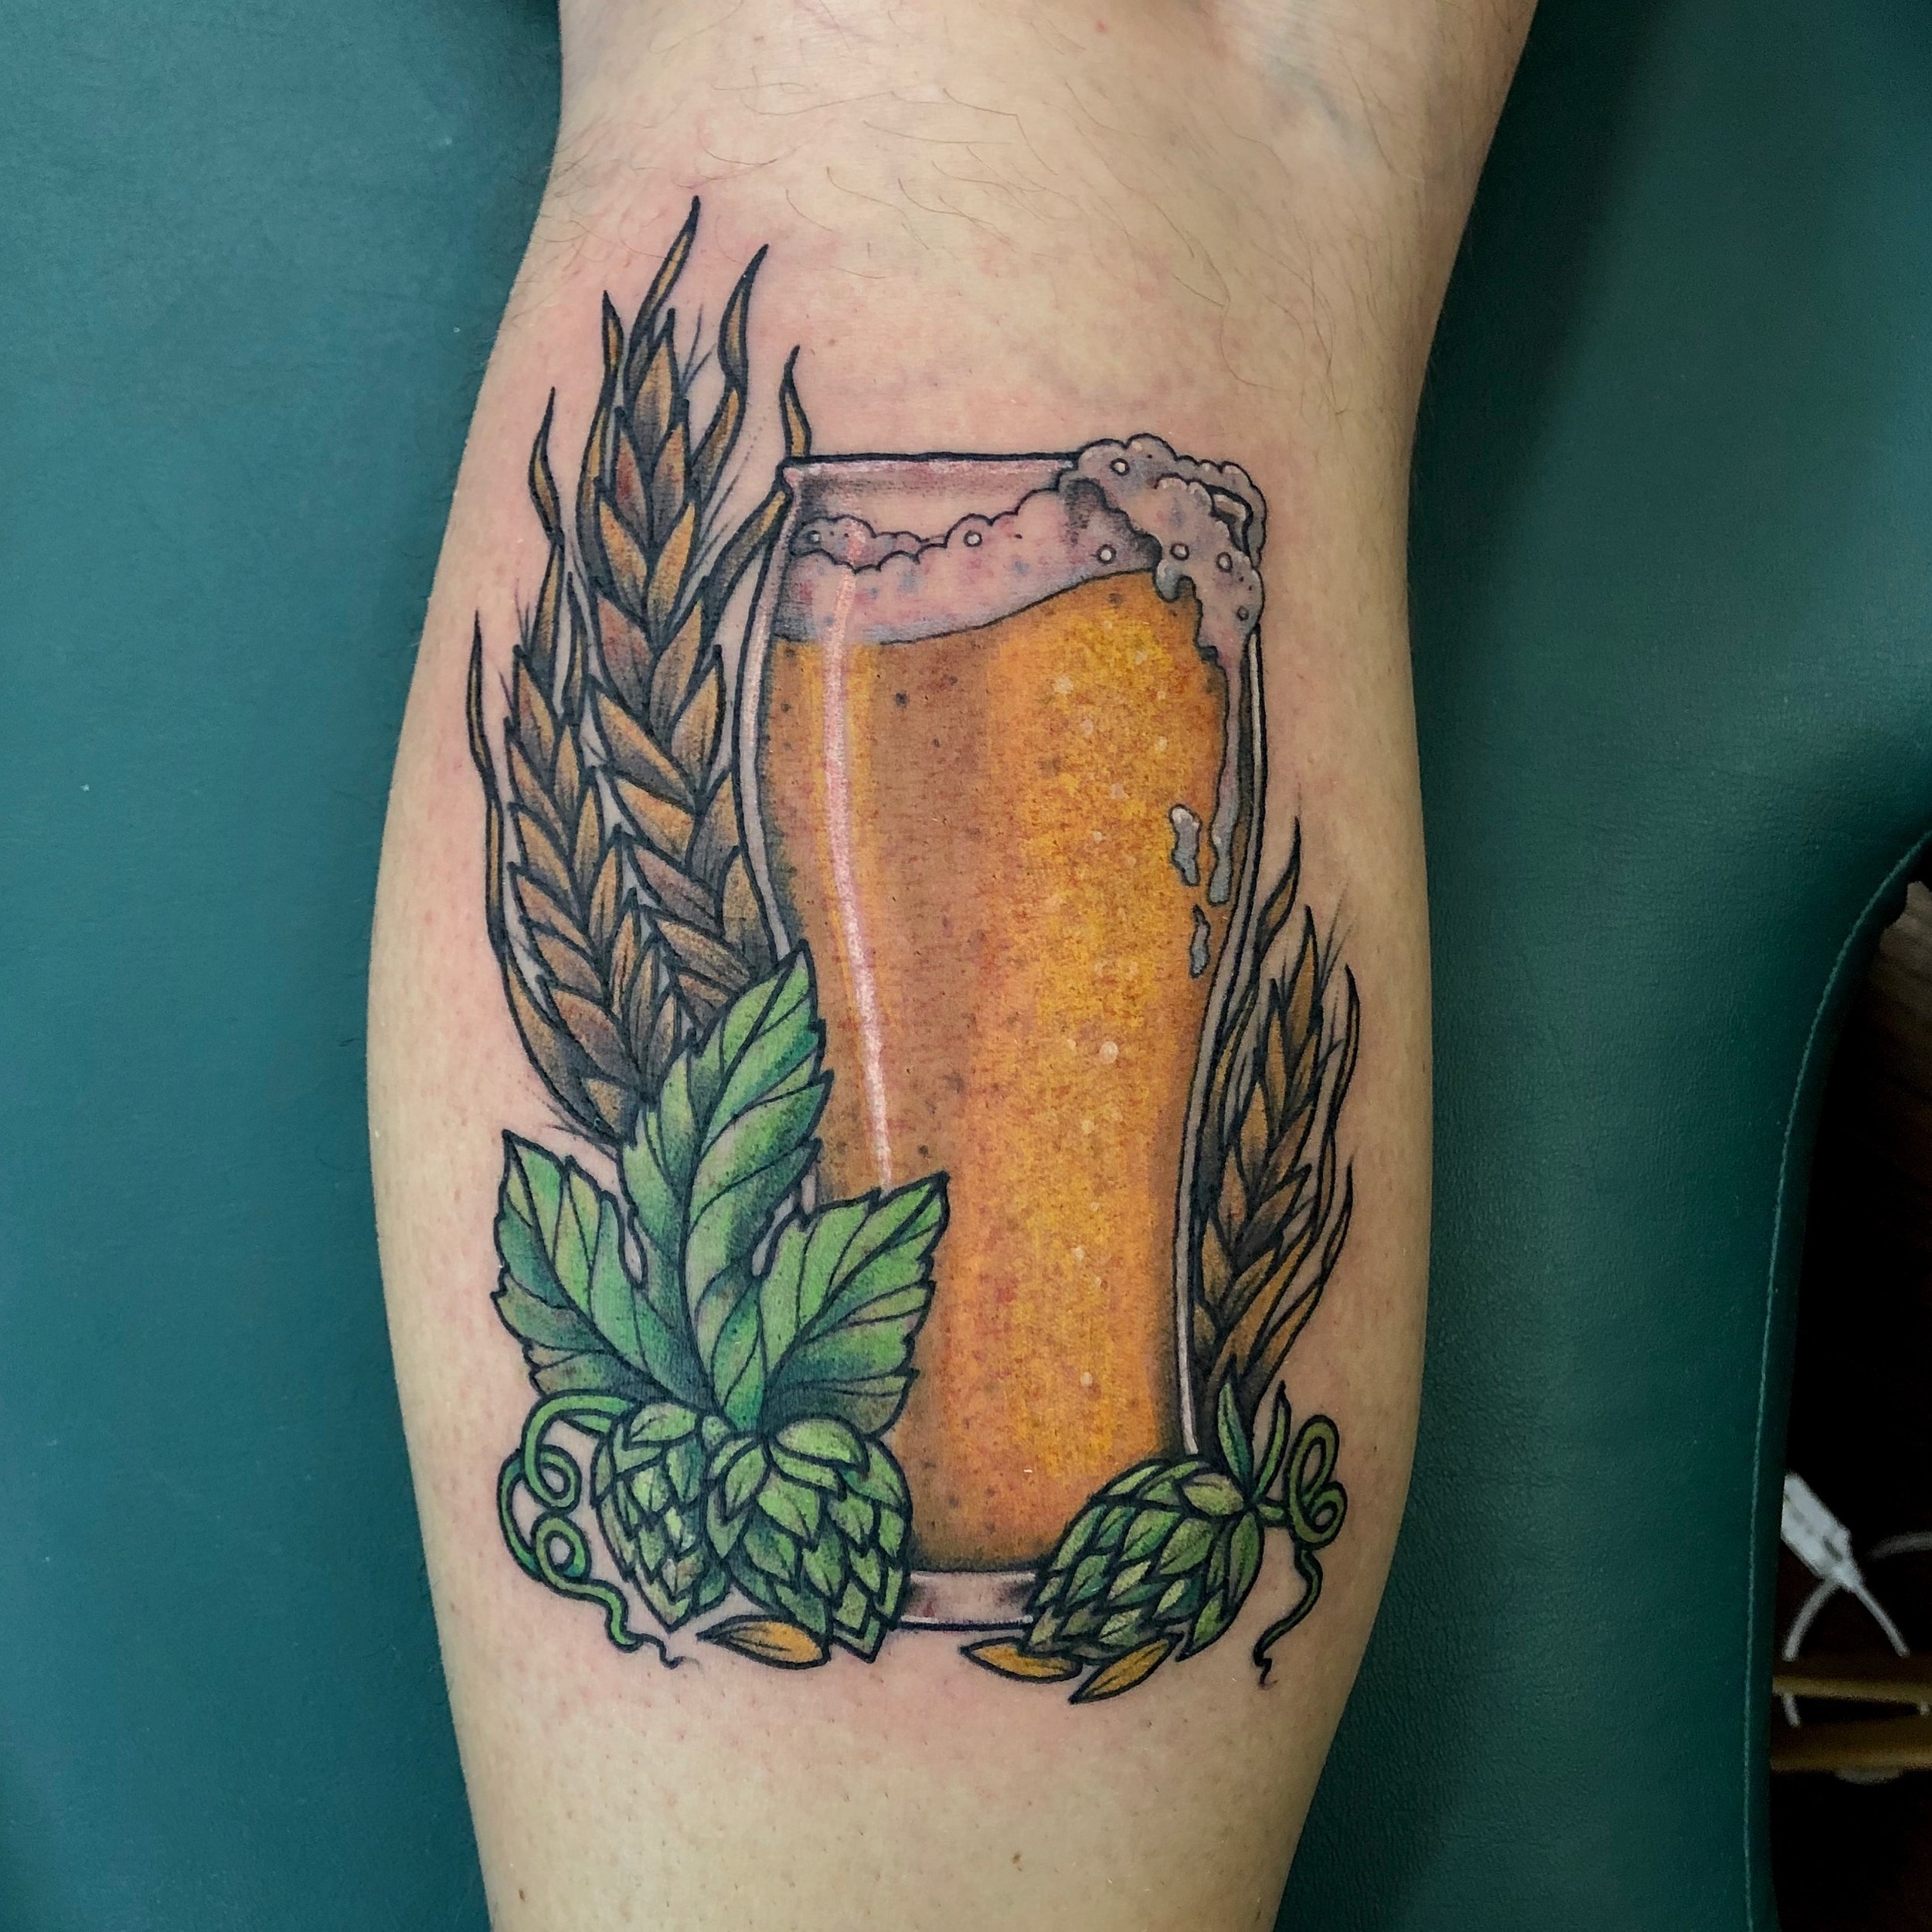 25 Awesomely Bad Beer Tattoos  First We Feast